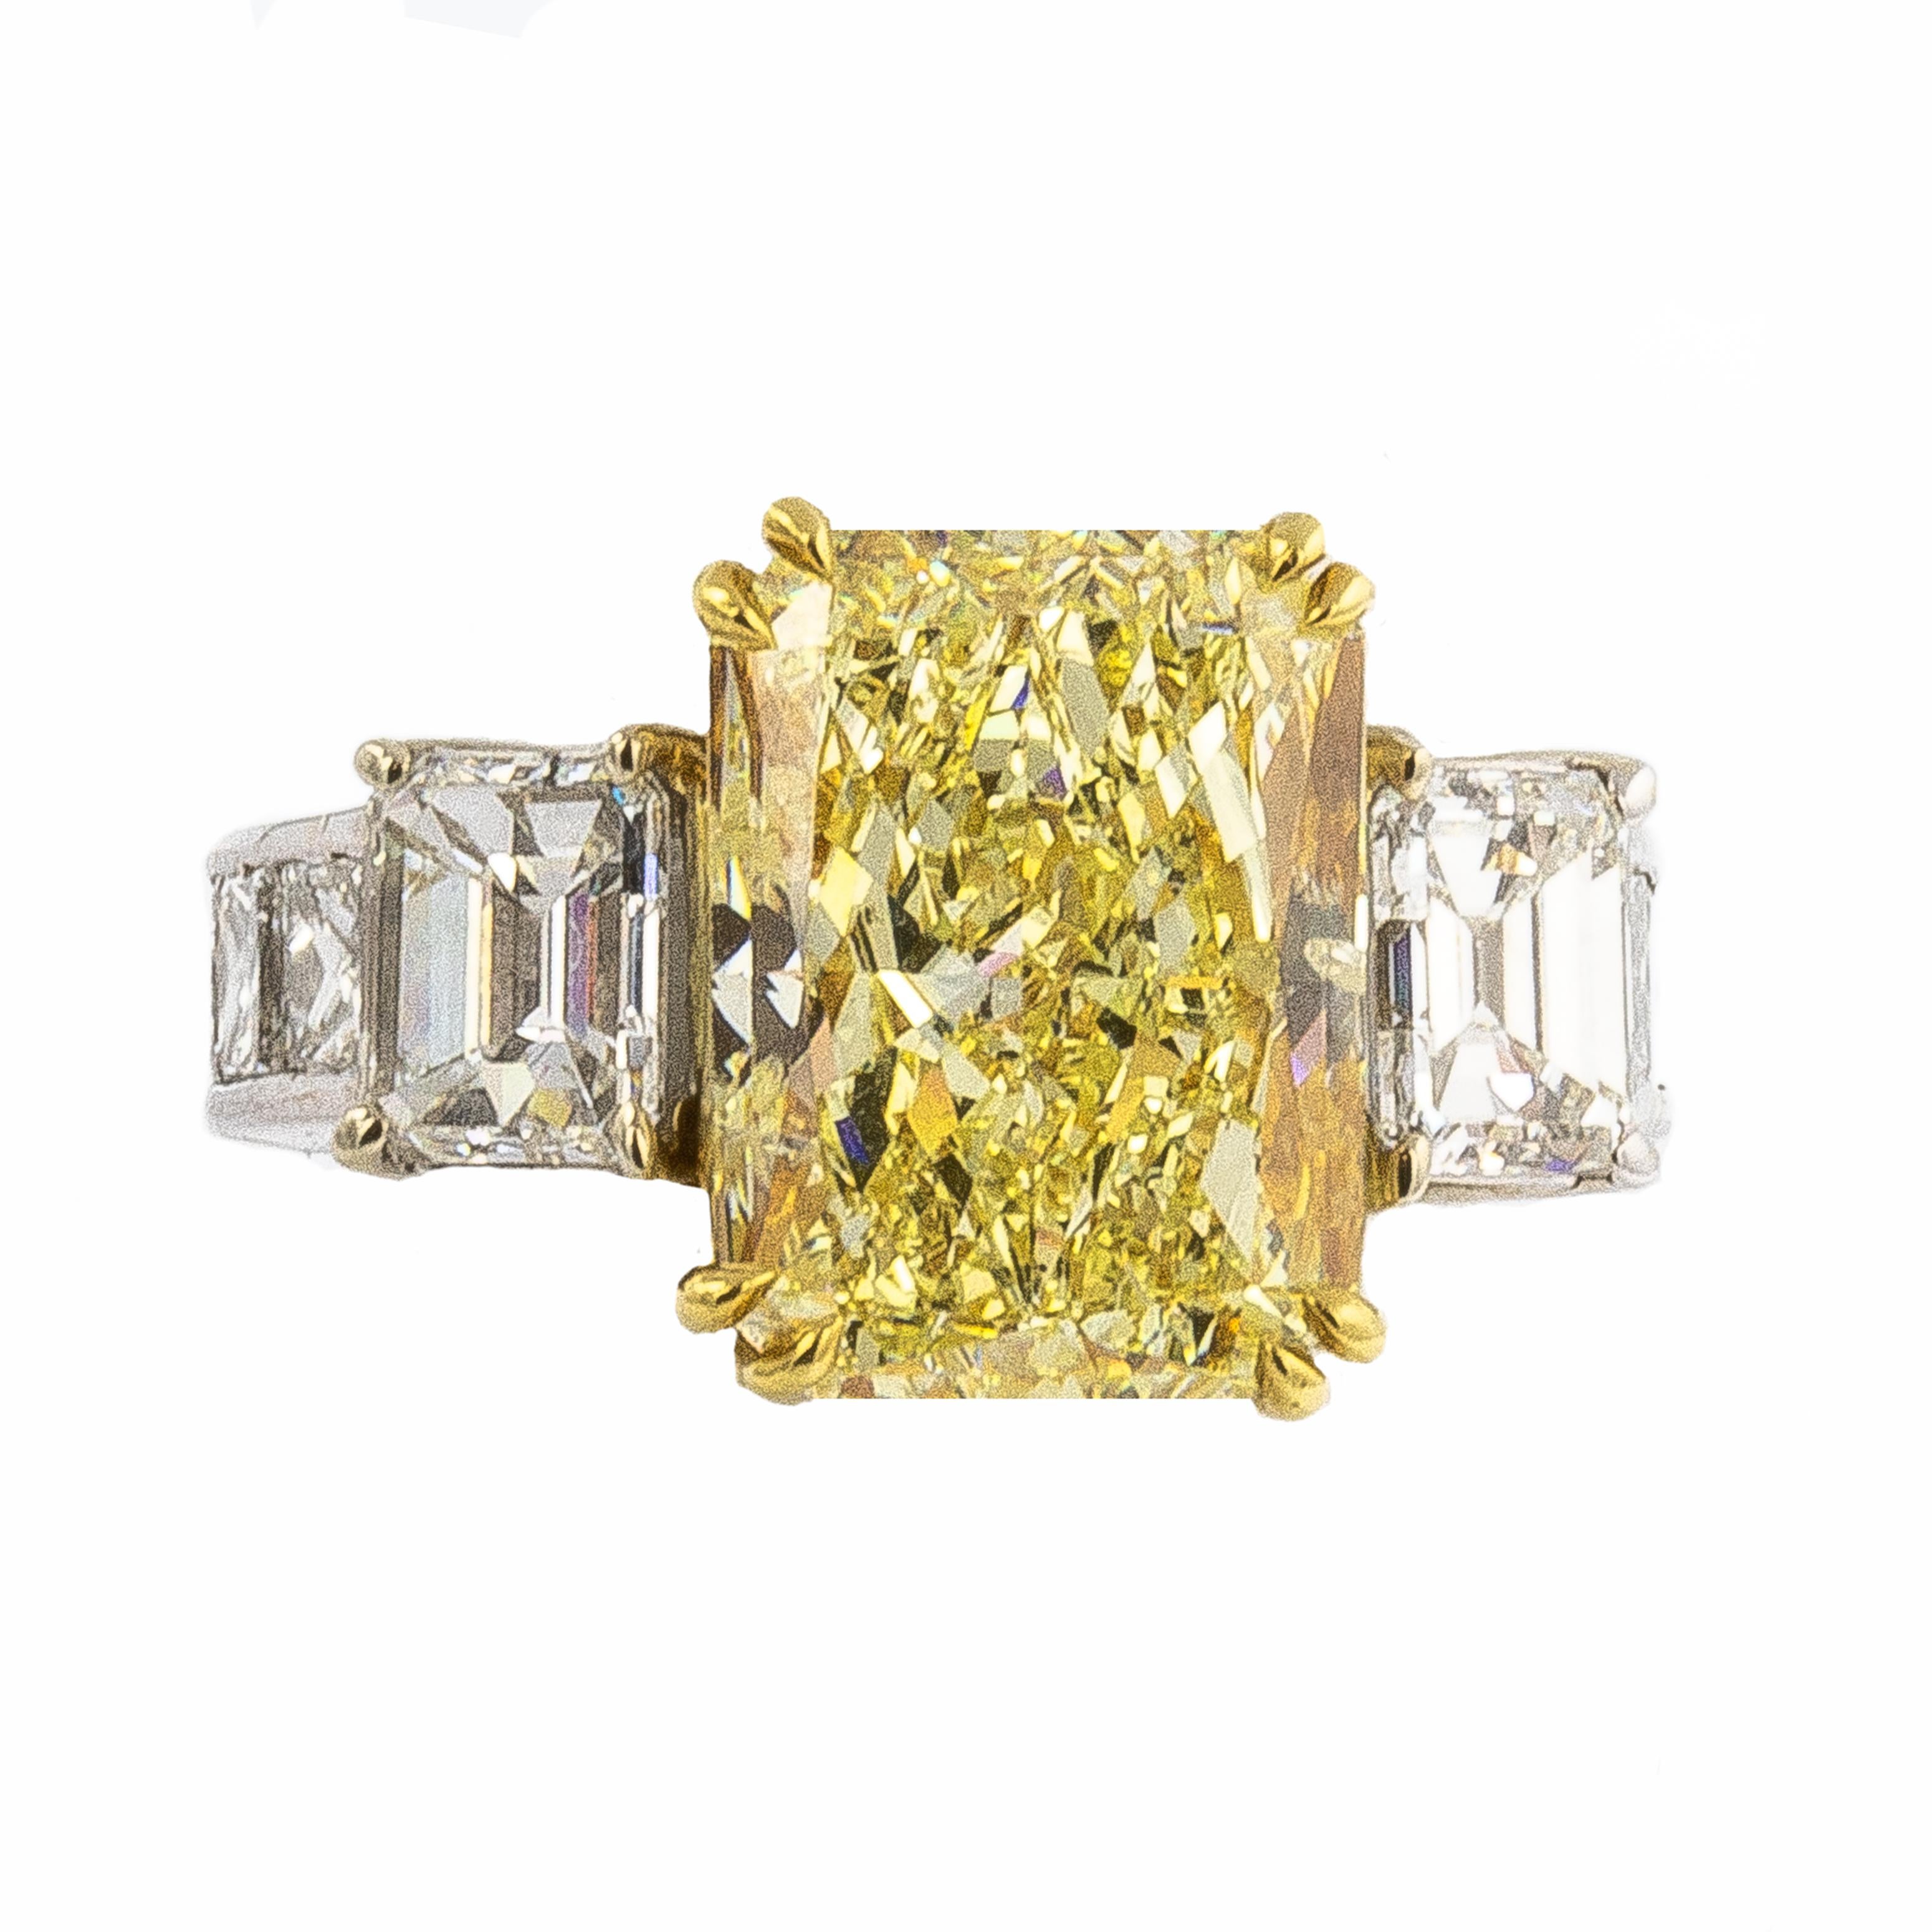 Radiant Cut GIA Certified Canary Diamond Ring 8.79 Carat